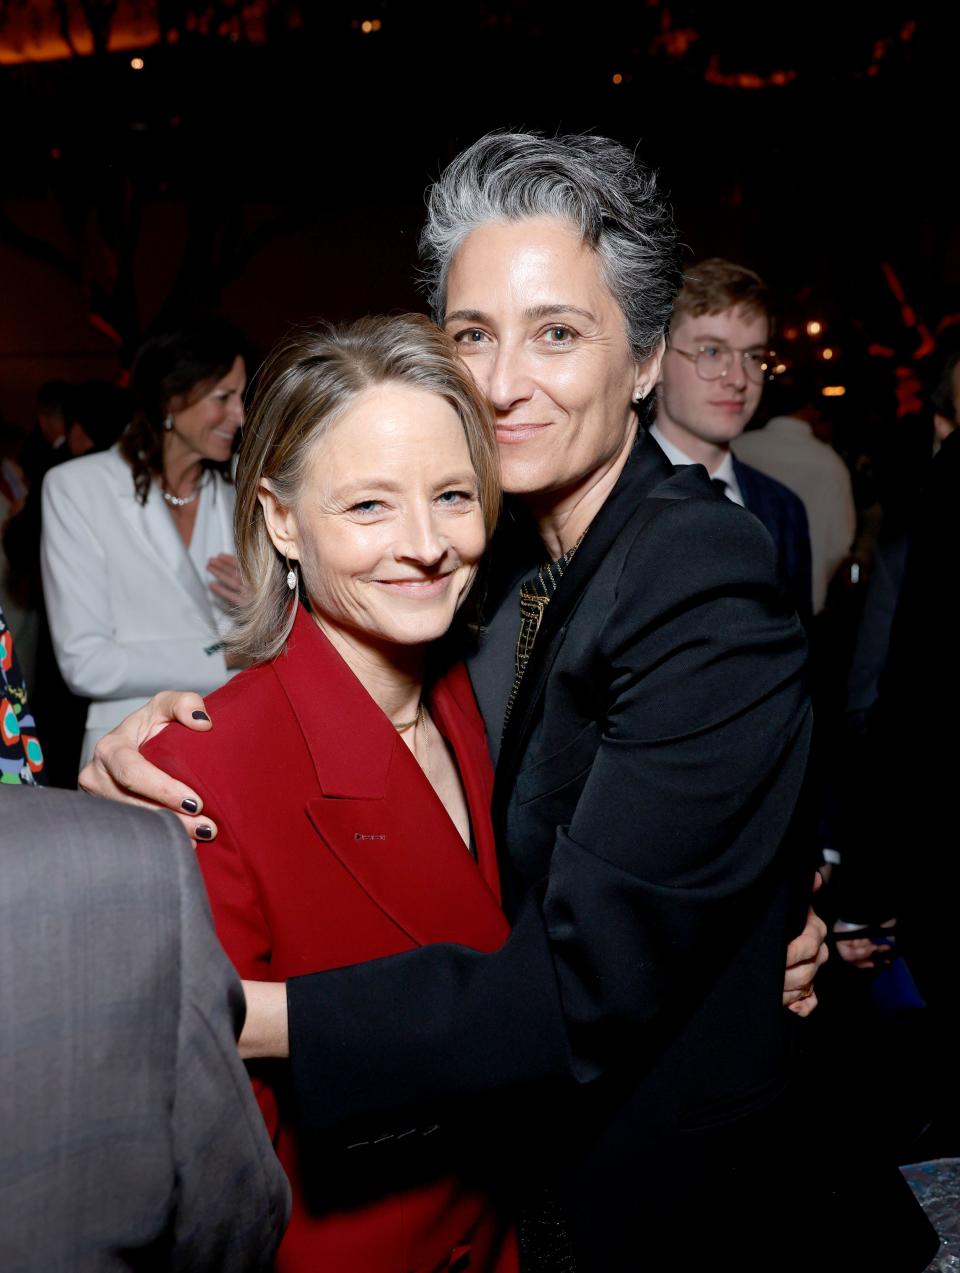 Jodie Foster and Alexandra Hedison embrace at an event, both wearing suits. Jodie wears a red suit, and Alexandra wears a black suit. People are seen in the background